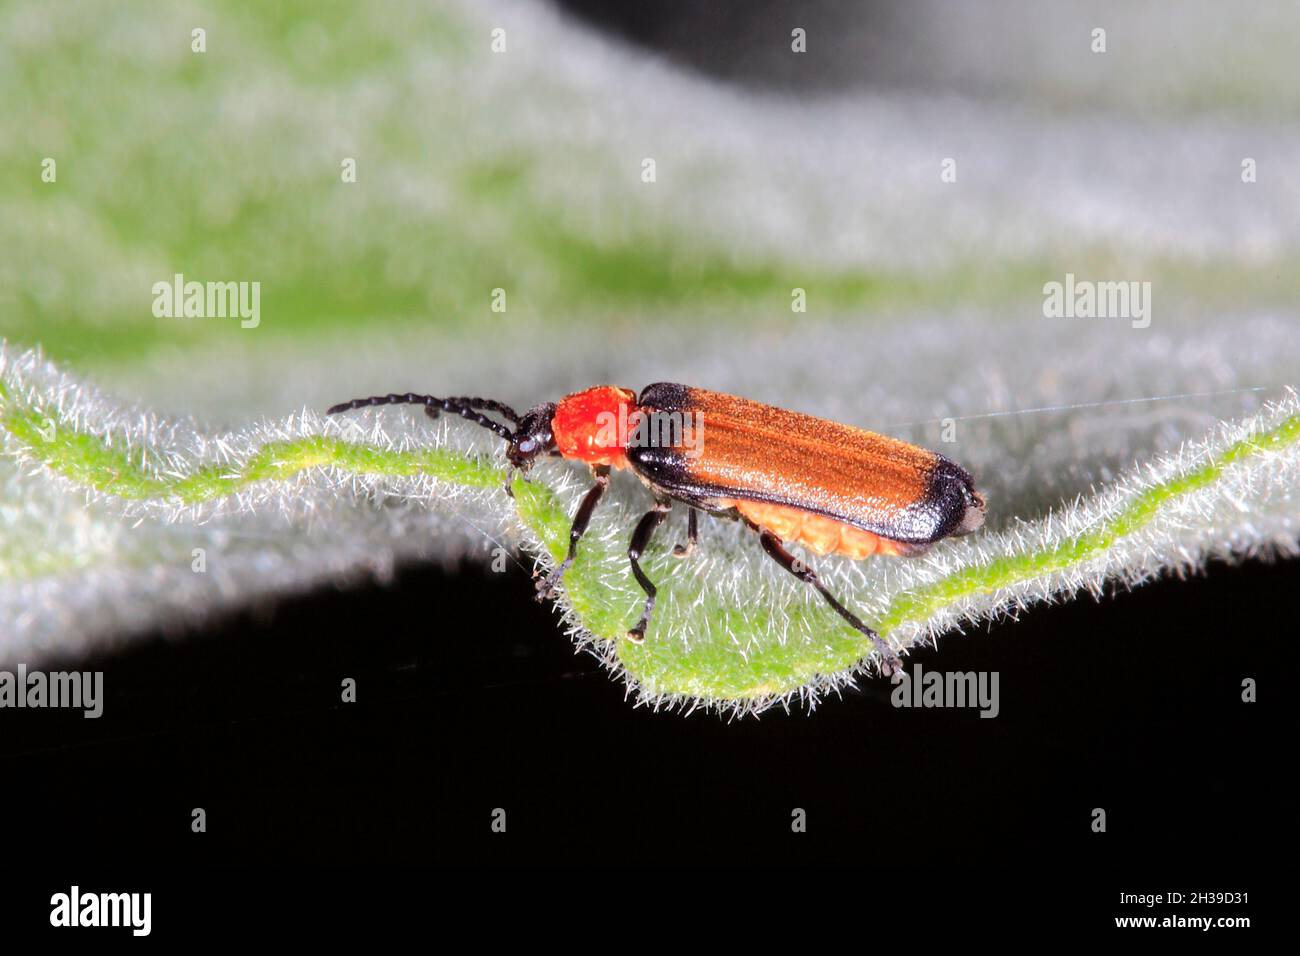 Soldier Beetle, Sphaerarthrum sp. Also known as Small Brown Soldier Beetle. Coffs Harbour, NSW, Australia Stock Photo